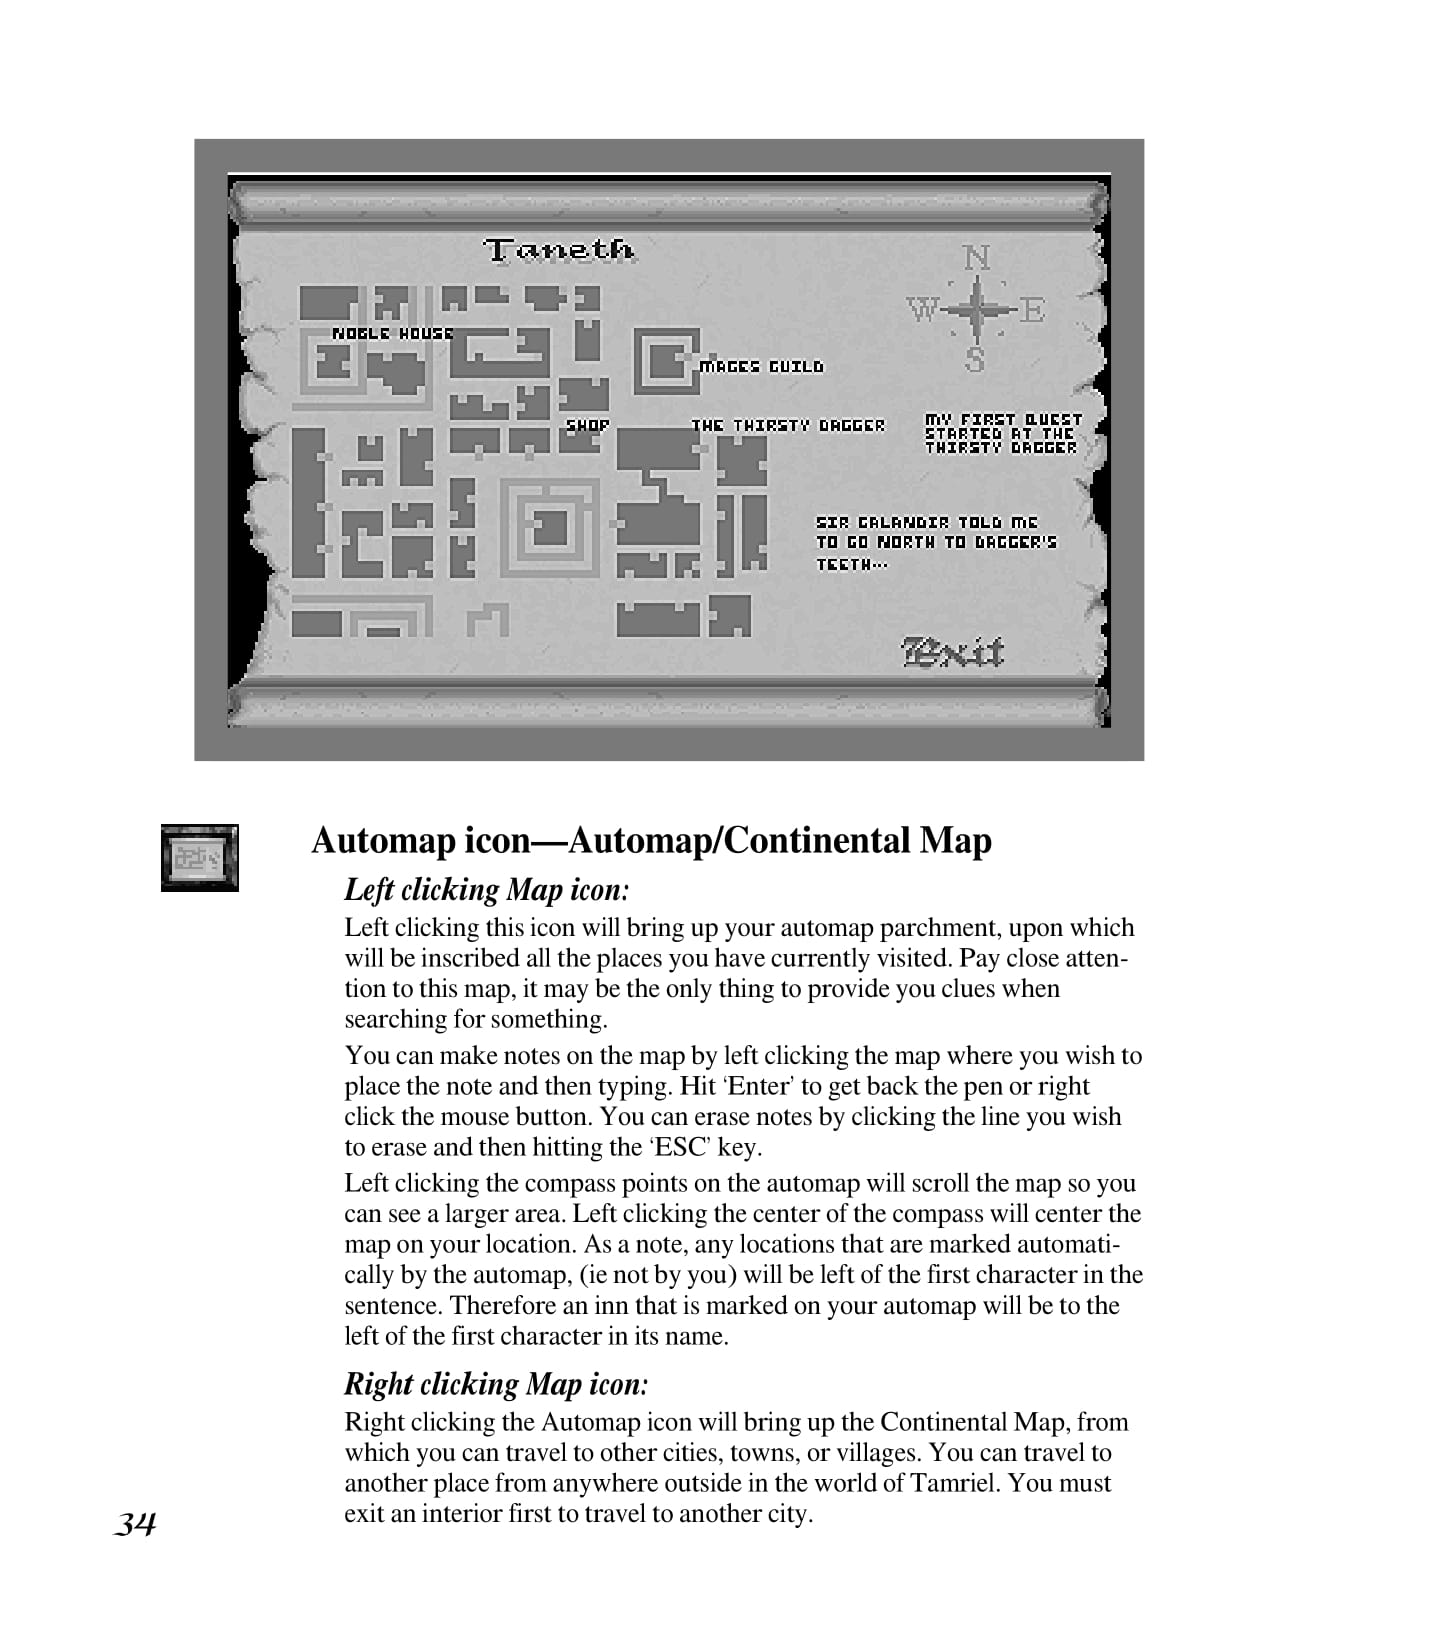 Player's Guide image 44